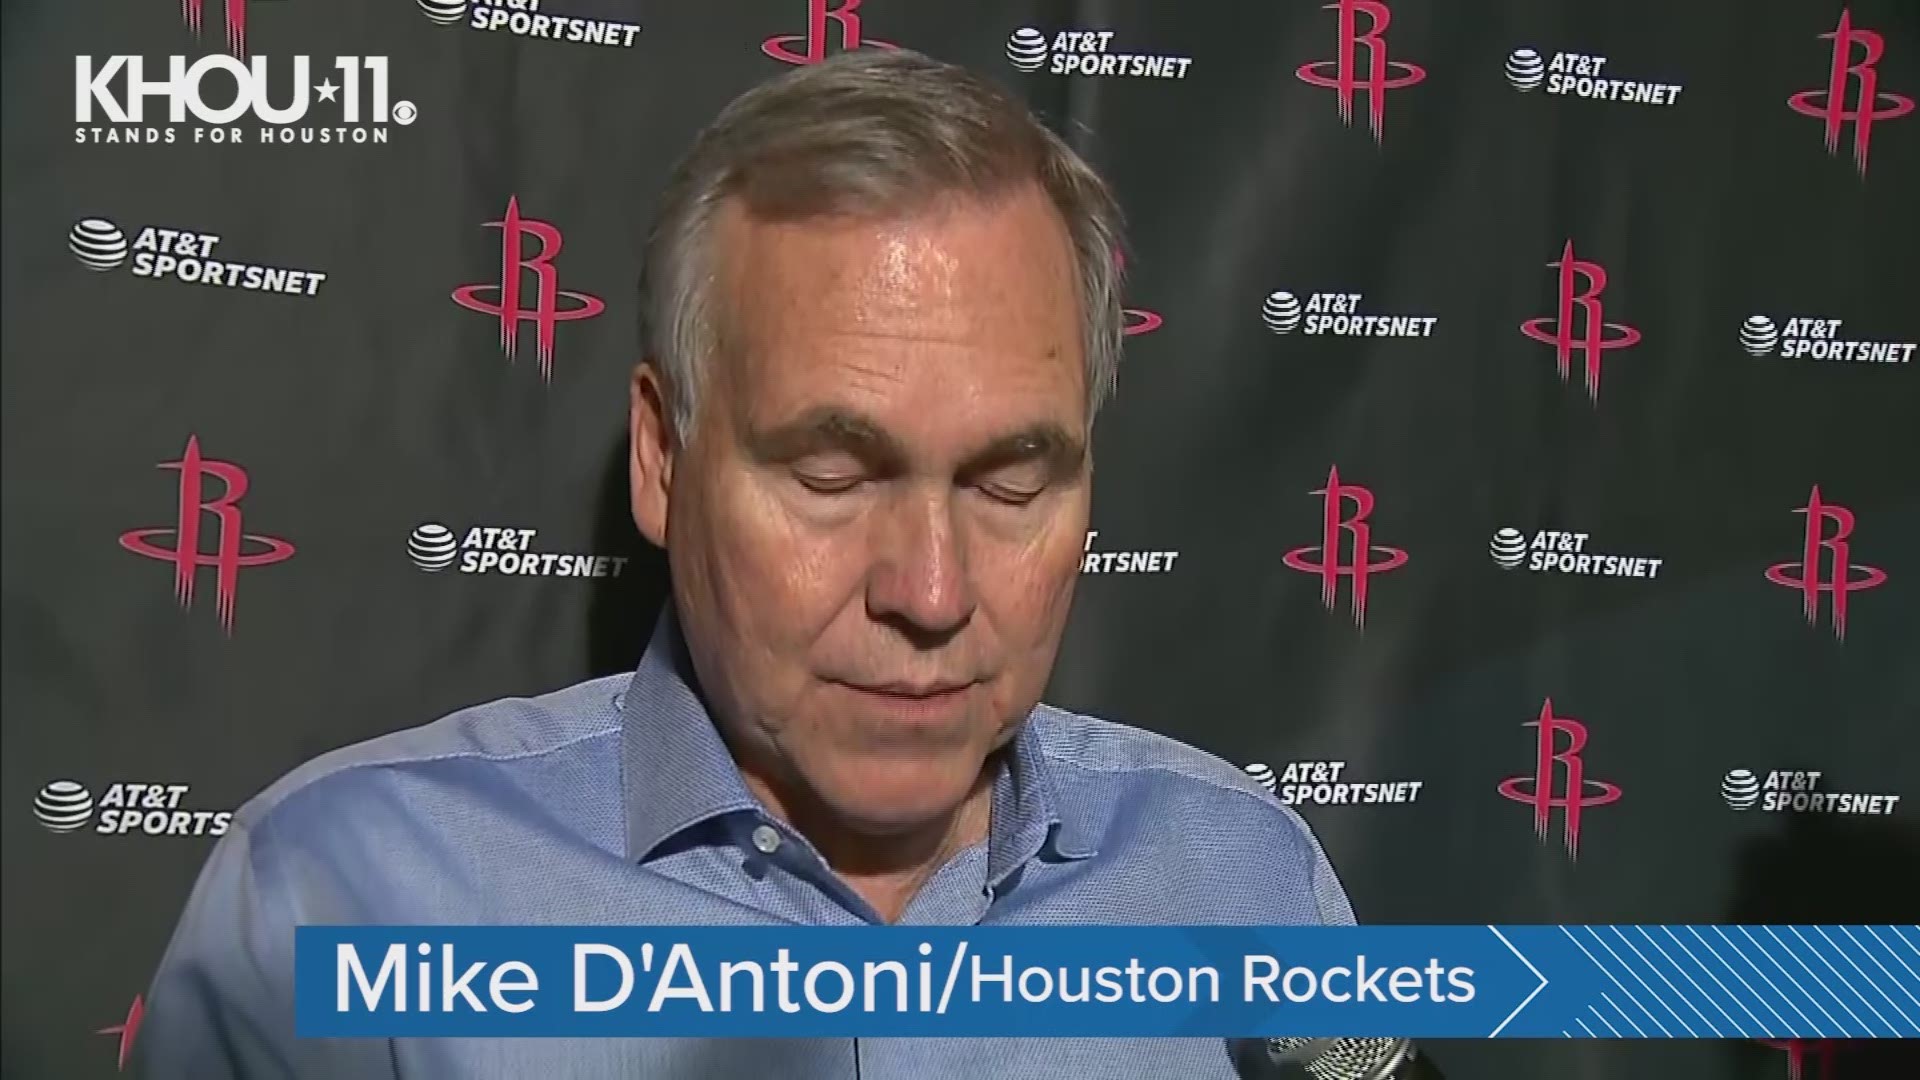 Rockets Coach Mike D’Antoni and players Austin Rivers and Eric Gordon react to the tragedy that claimed the lives of Kobe Bryant and eight others Sunday.